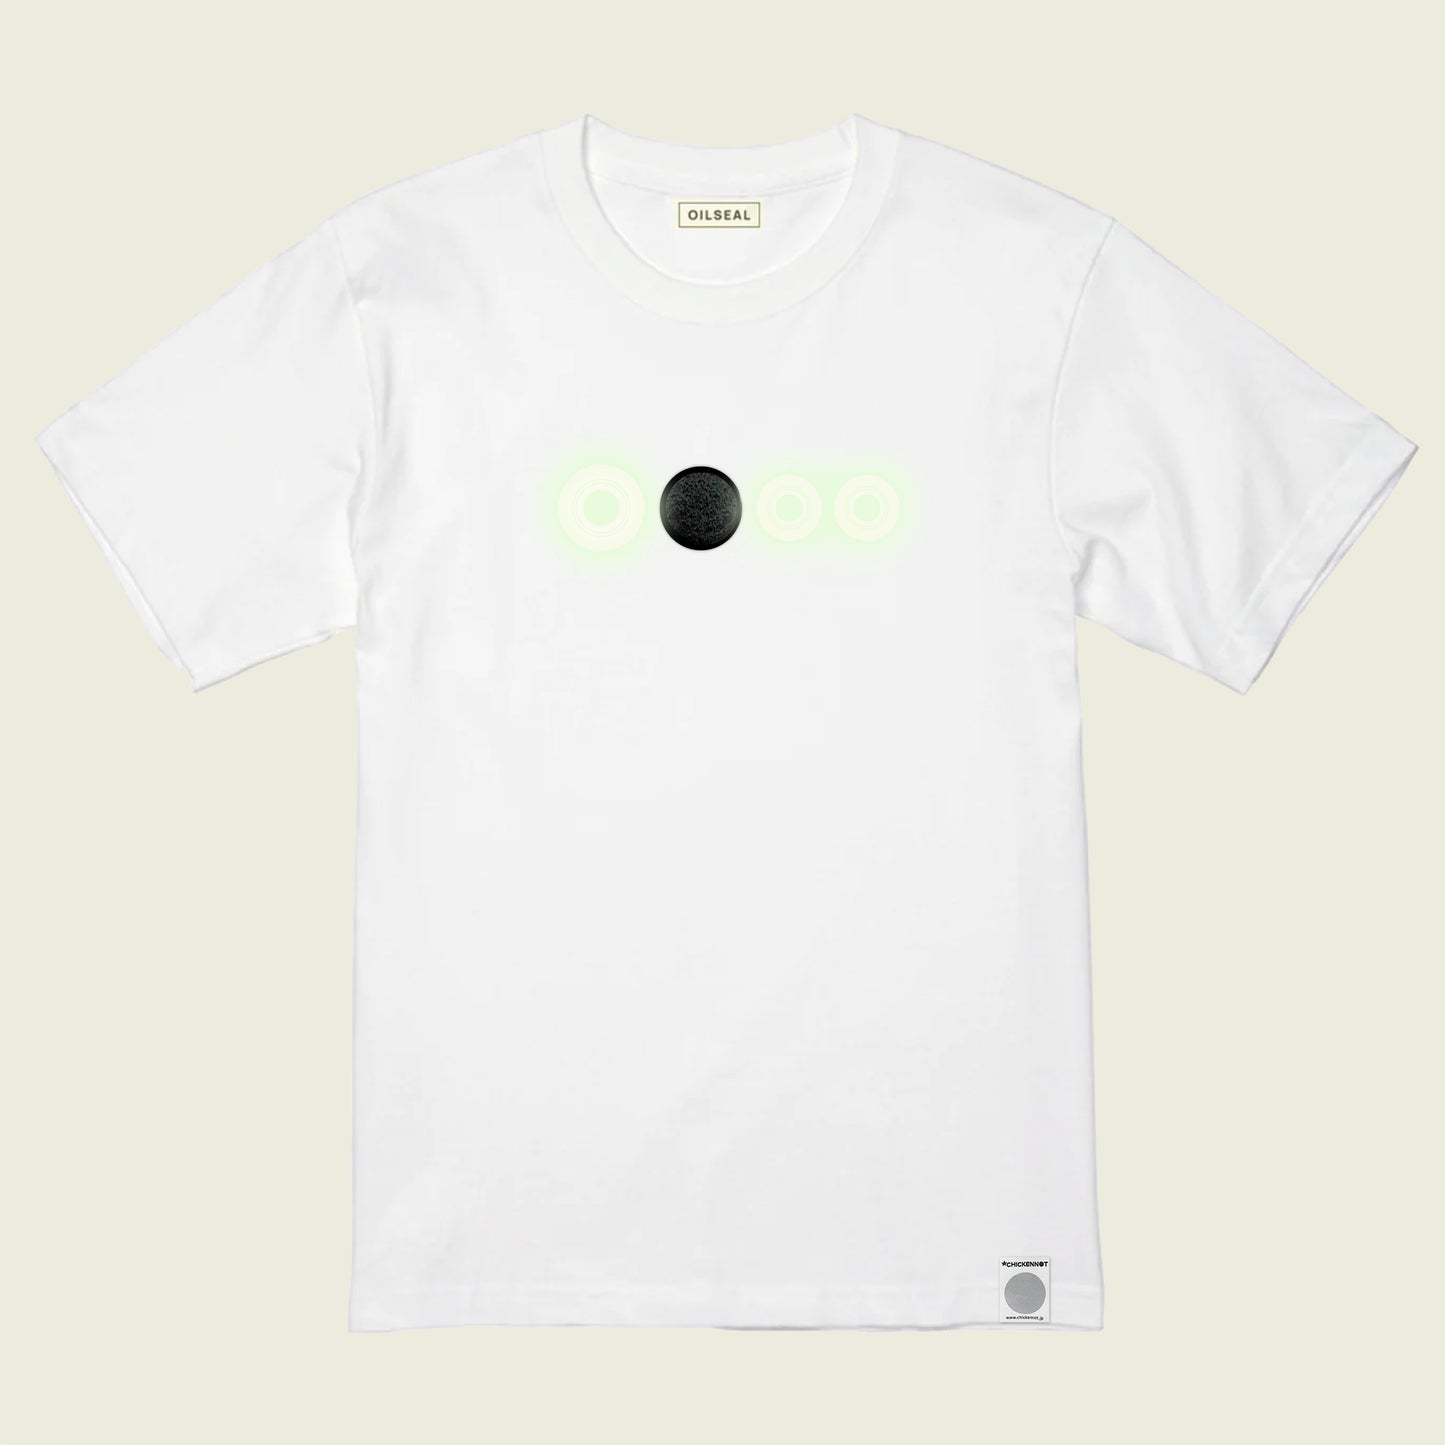 OILSEAL x CHICKENNOT GLOW IN THE DARK PATCH T-SHIRT